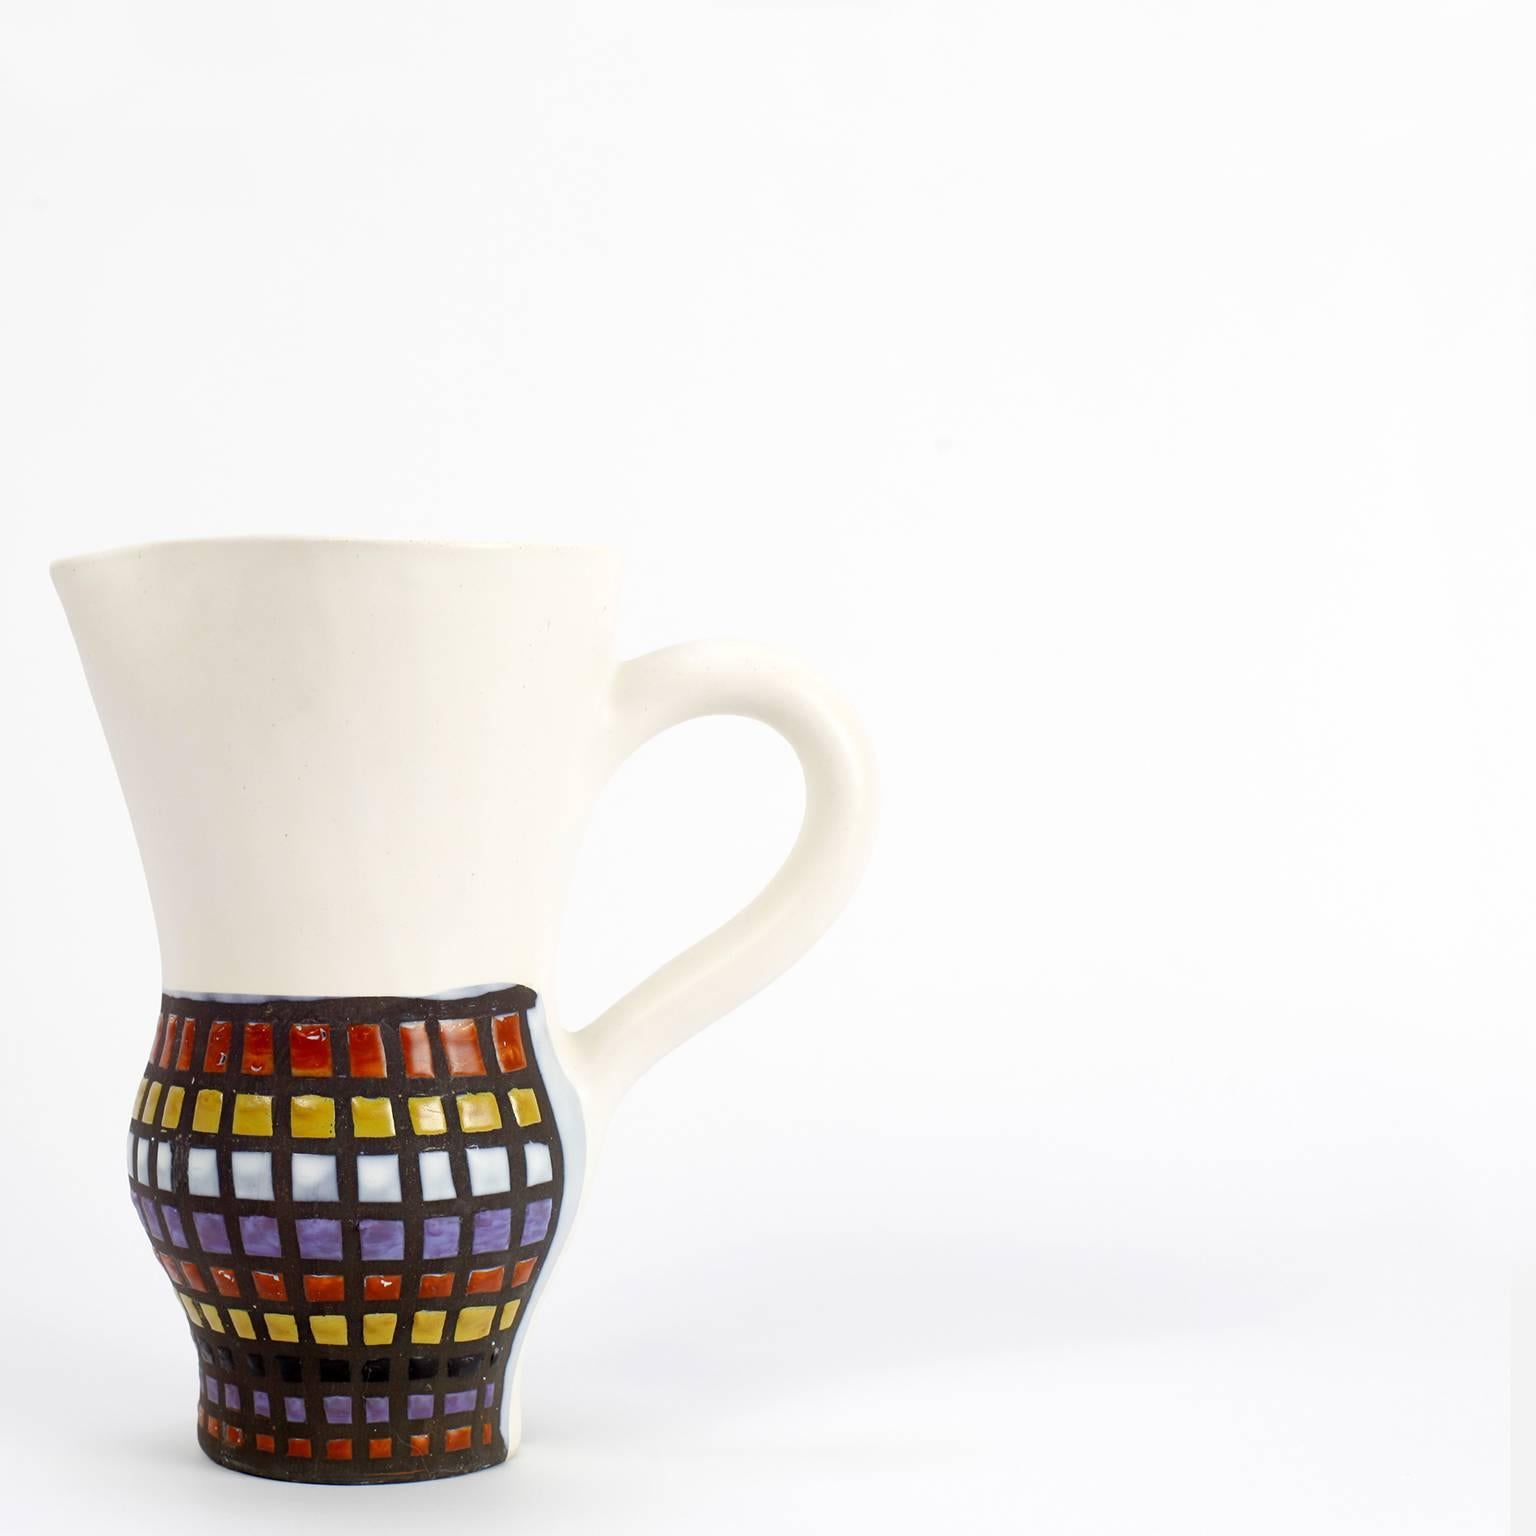 Pitcher and four cups by Roger Capron: One ceramic pitcher and four cups (a chip on one cup) matte white and multicolored decor. Pitcher stamped under the base. 
Pitcher measures H 25 cm, cups H 11.5 cm.